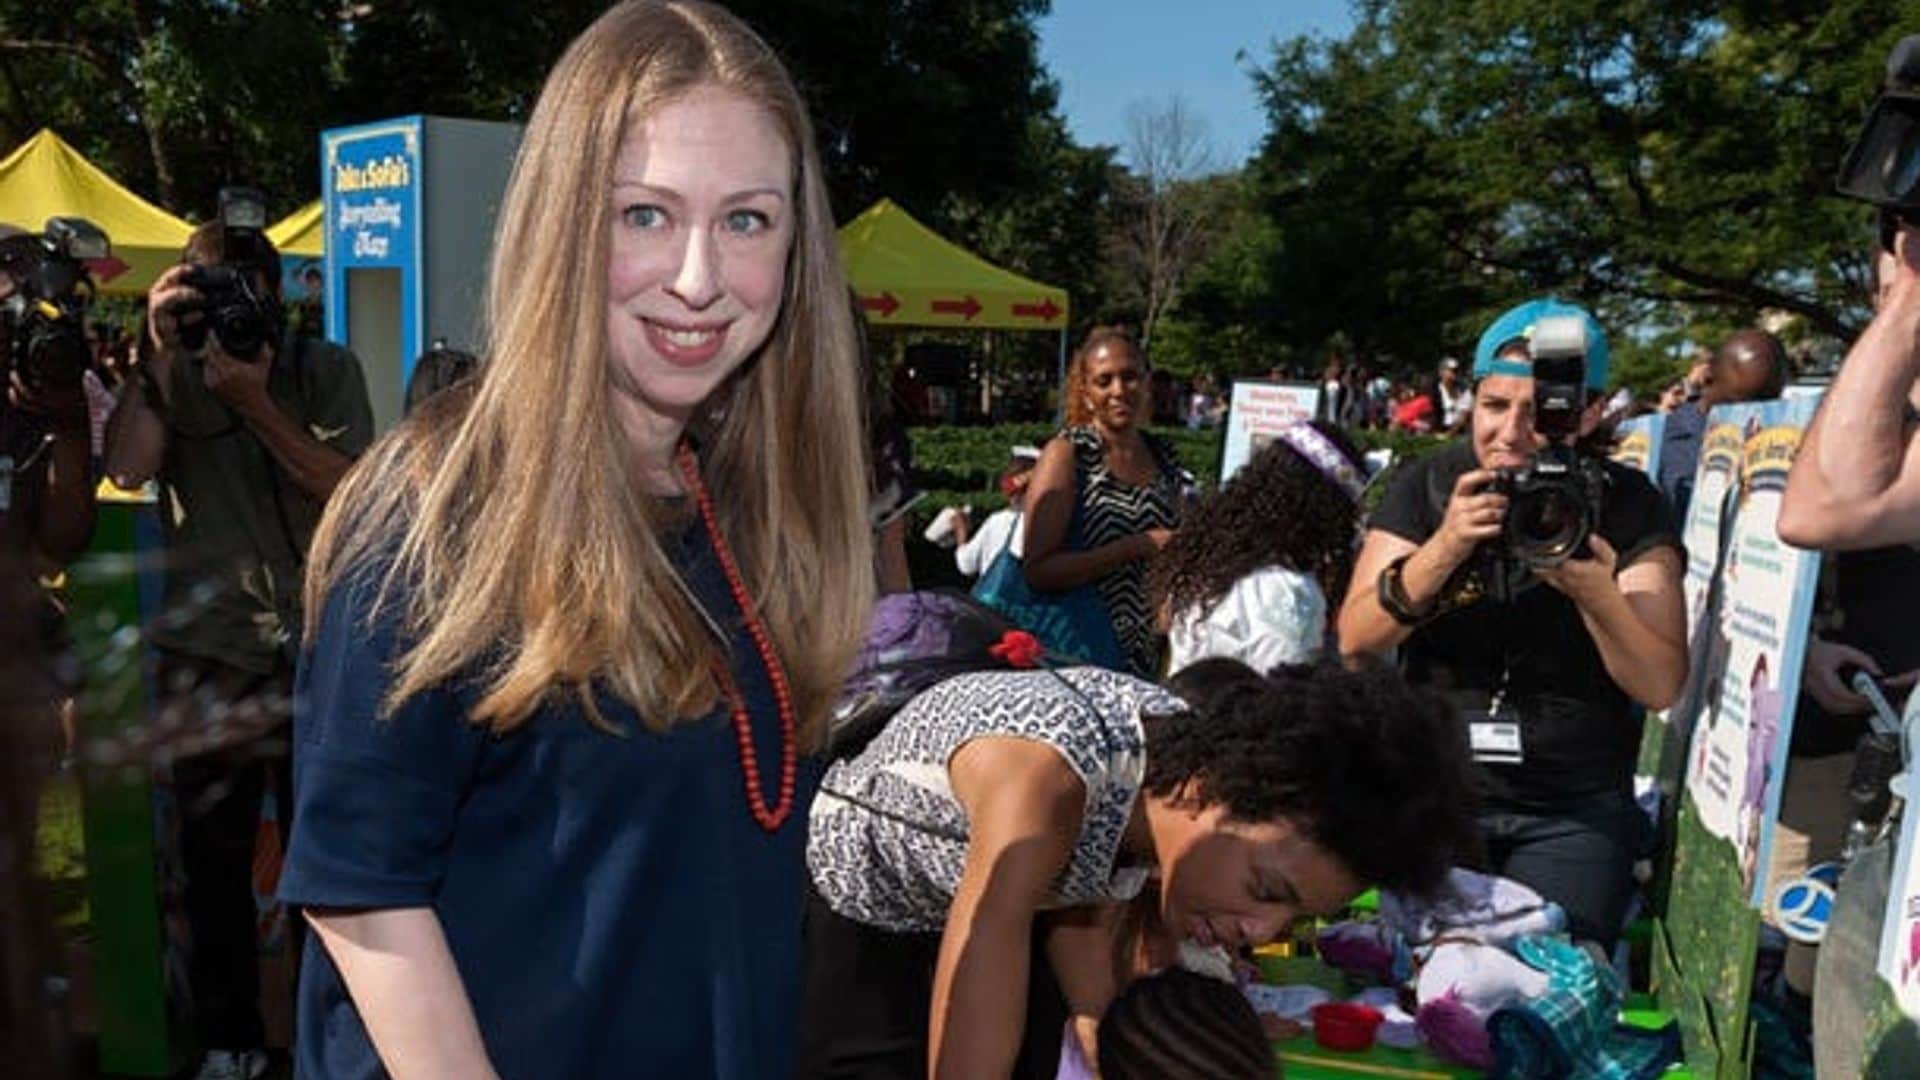 Chelsea Clinton gives birth to baby girl named Charlotte